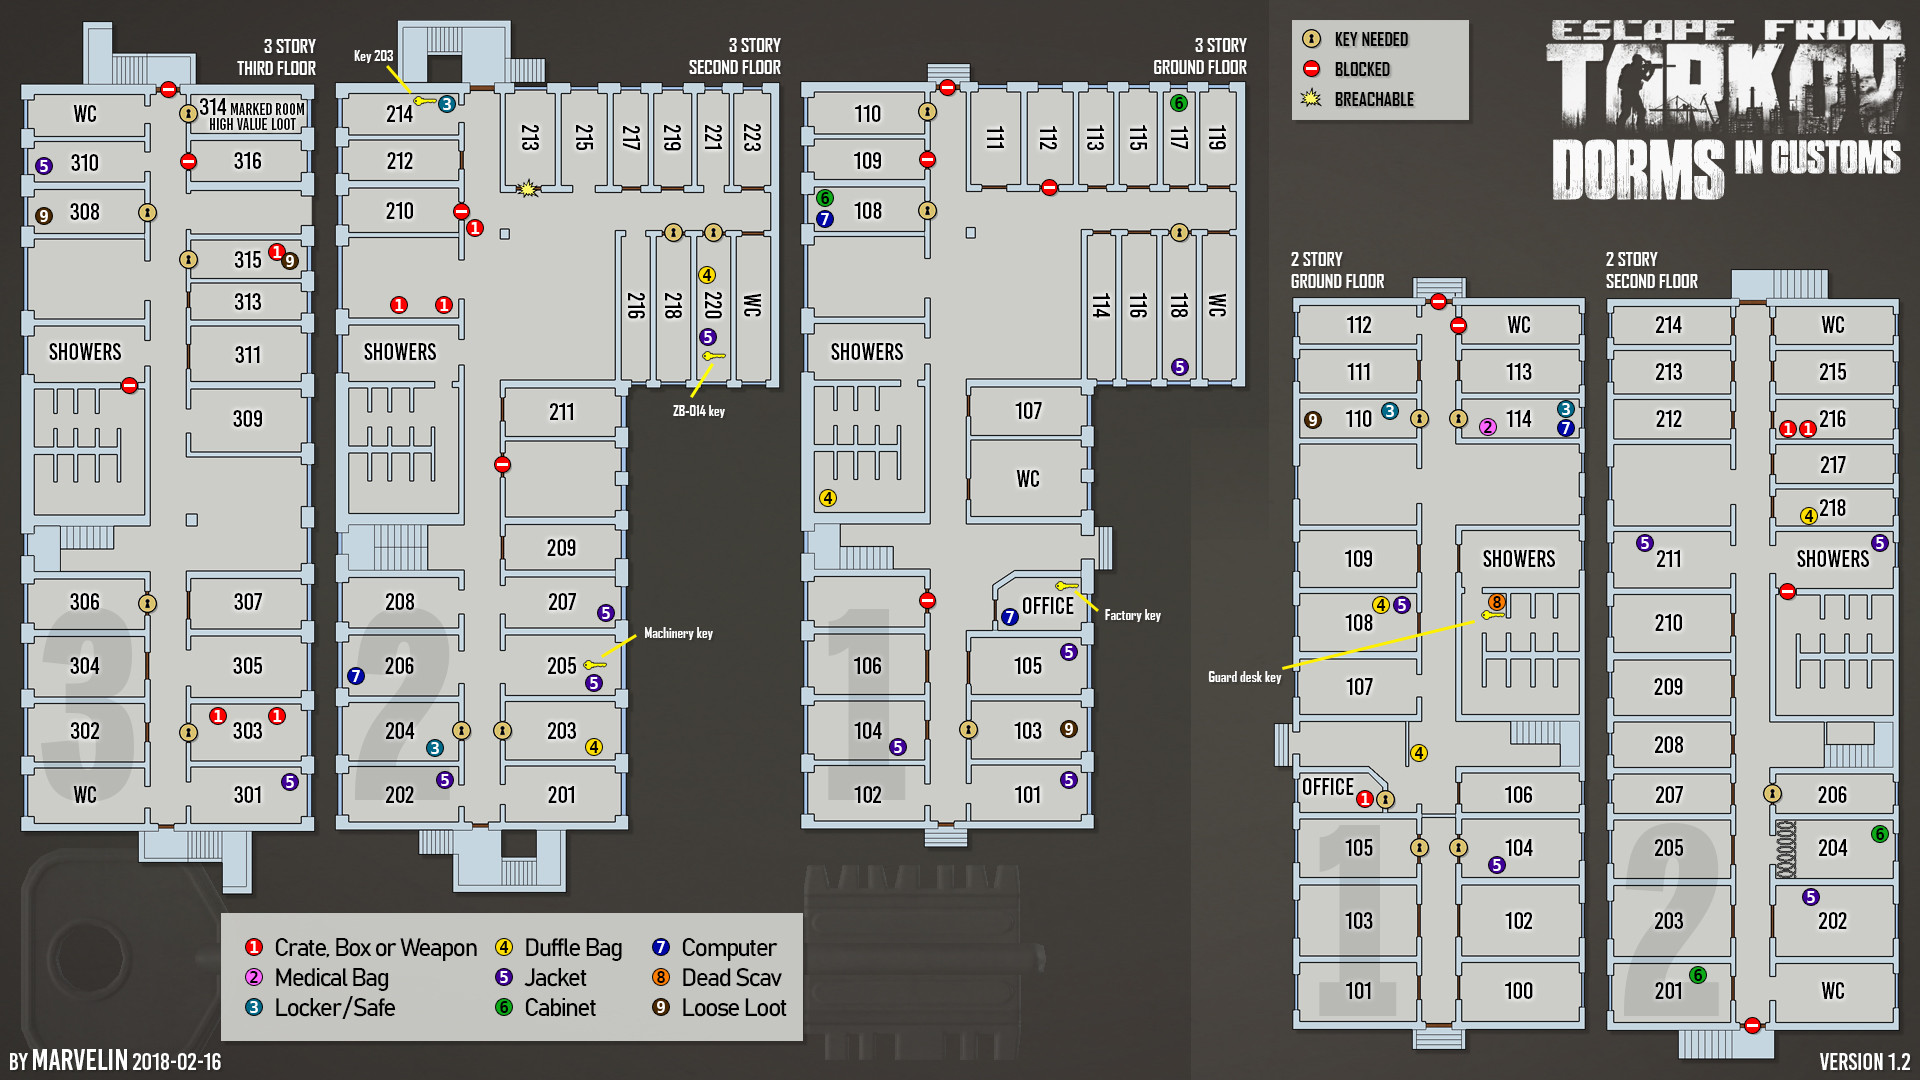 escape from tarkov reserve map key guide